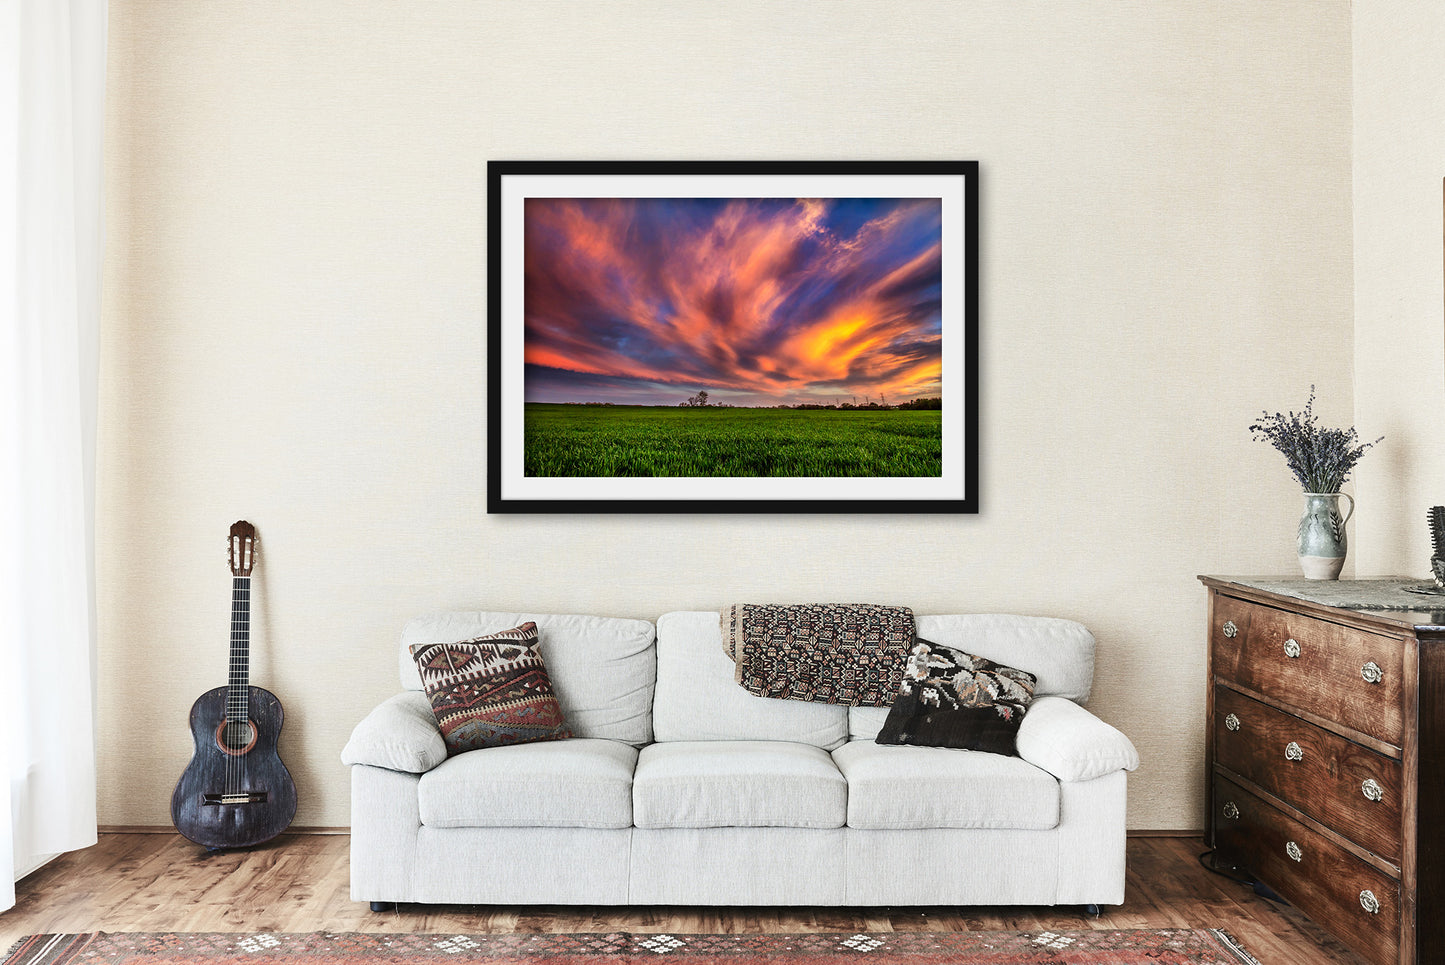 Framed and Matted Print - Picture of Clouds Illuminated by Sunlight Over Field at Sunset in Oklahoma Country Wall Art Farmhouse Decor